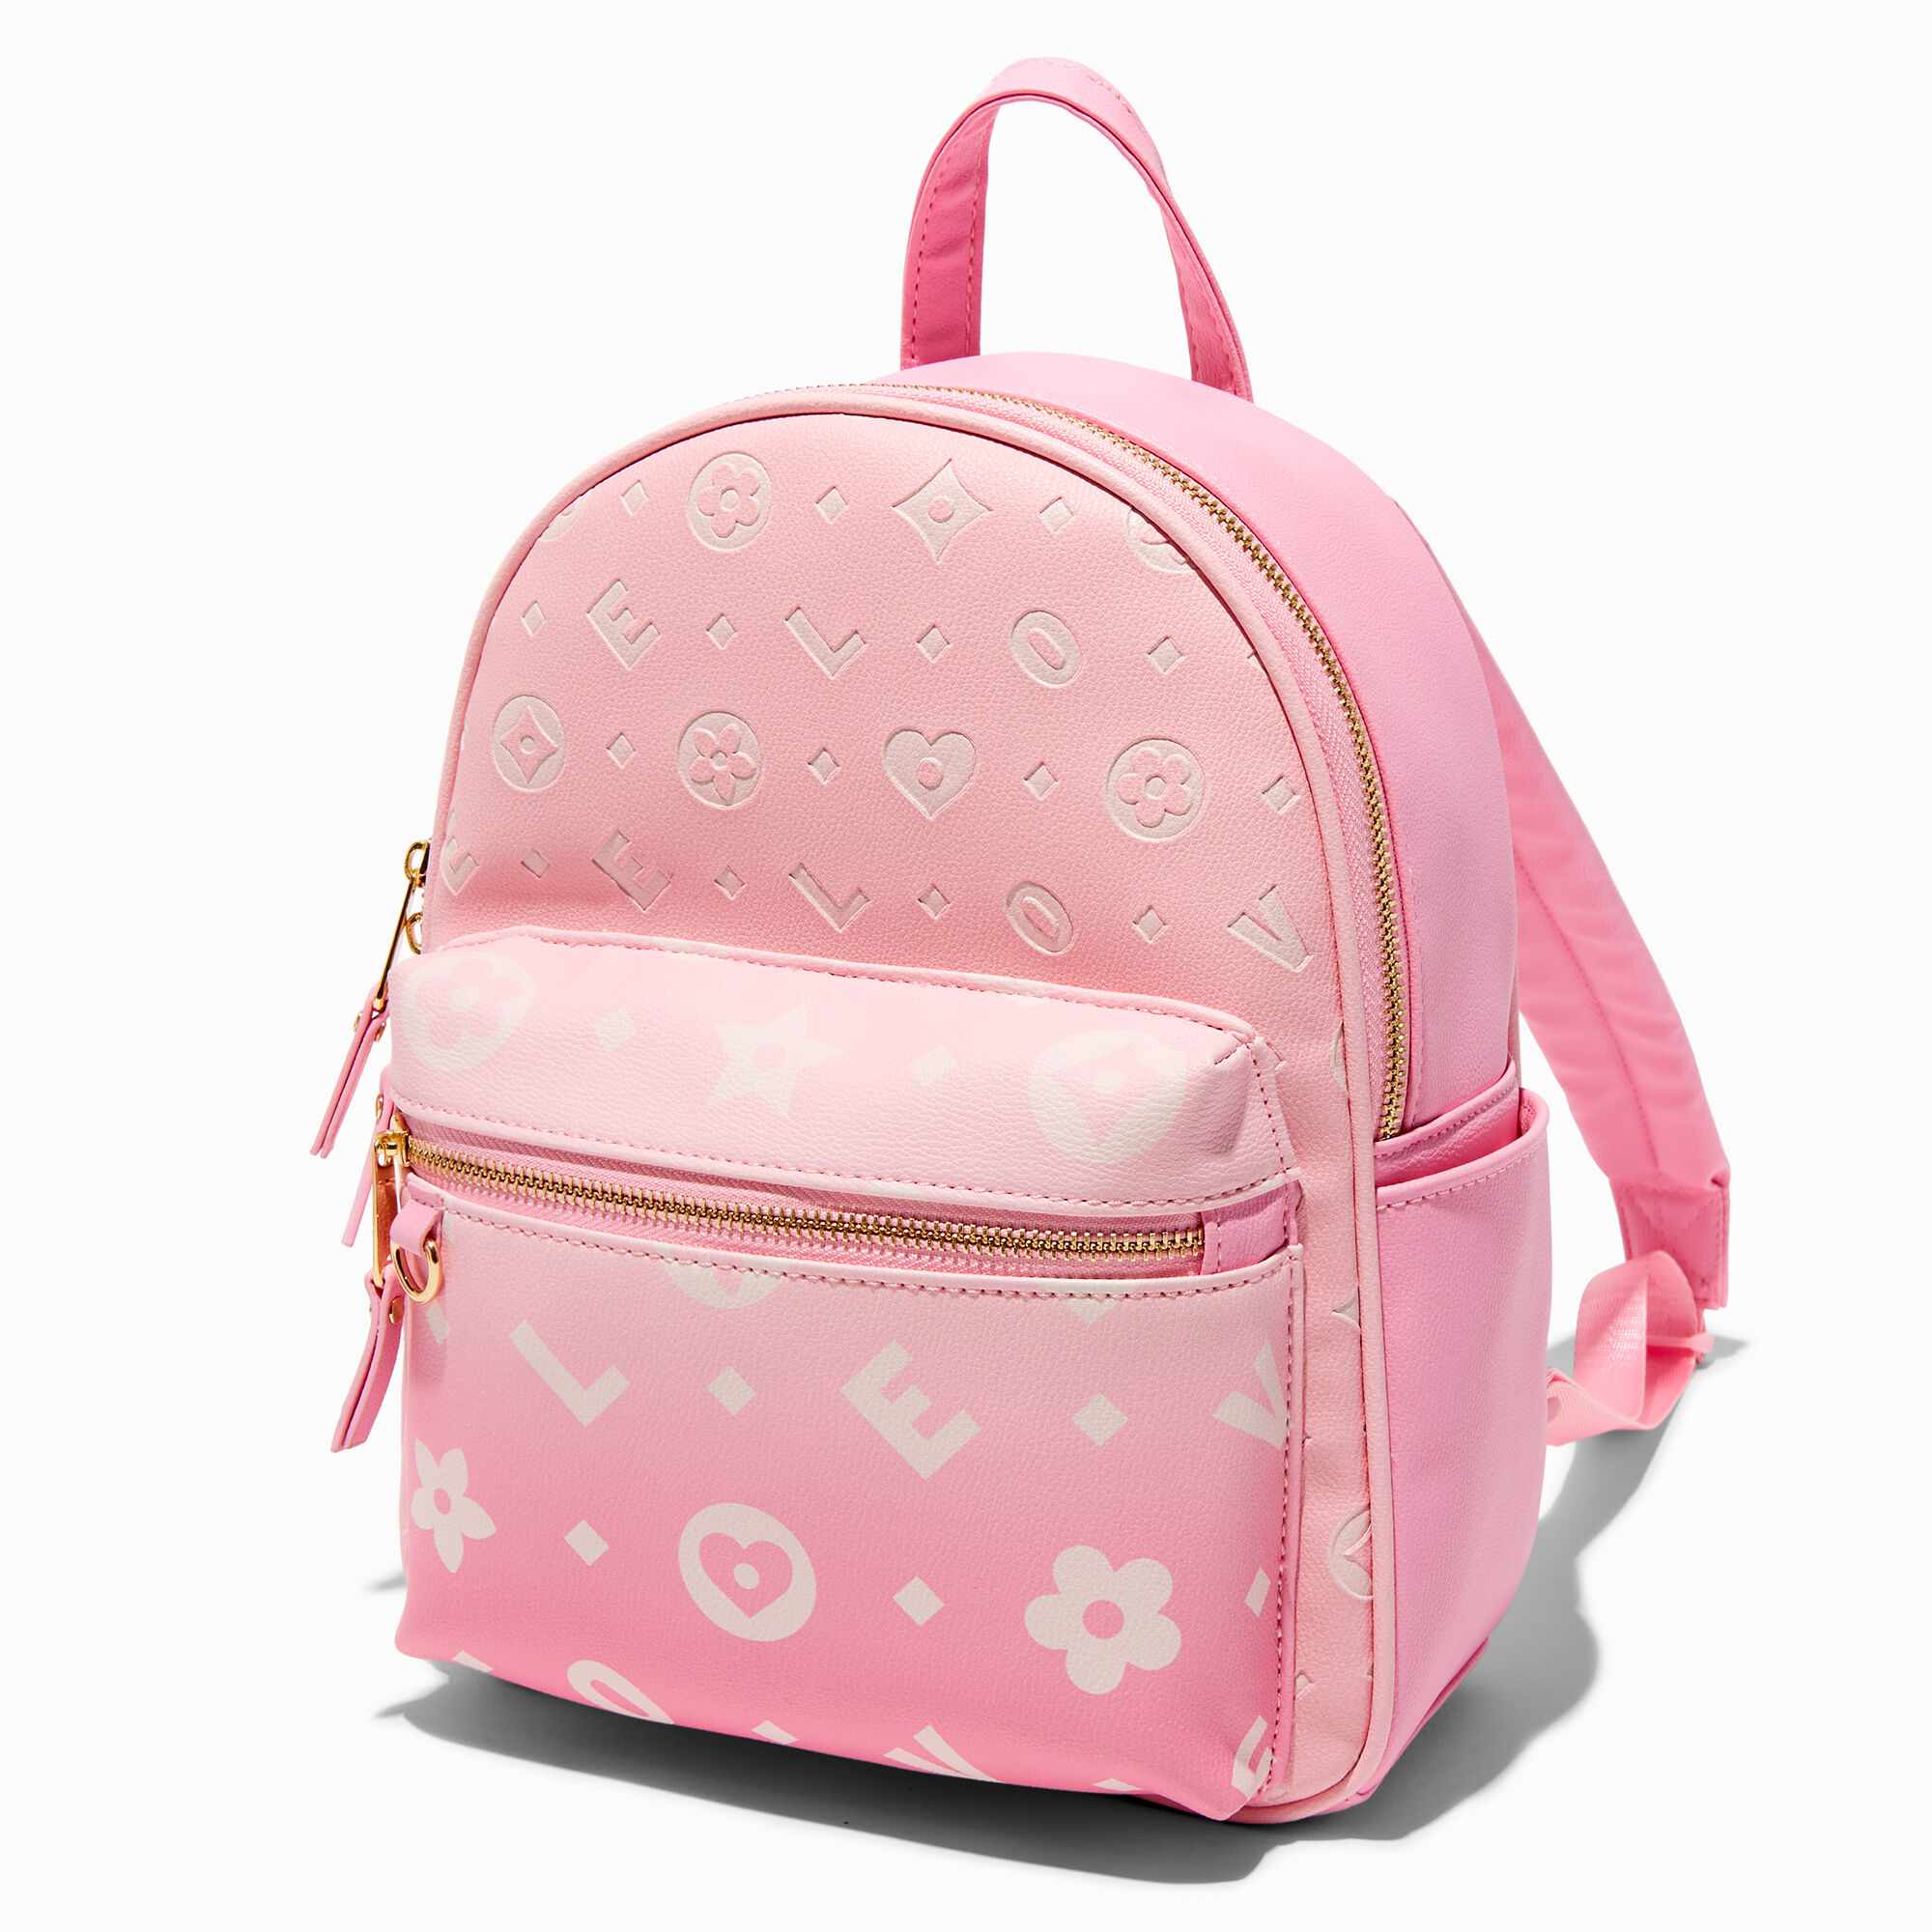 View Claires Status Icons Medium Backpack Pink information